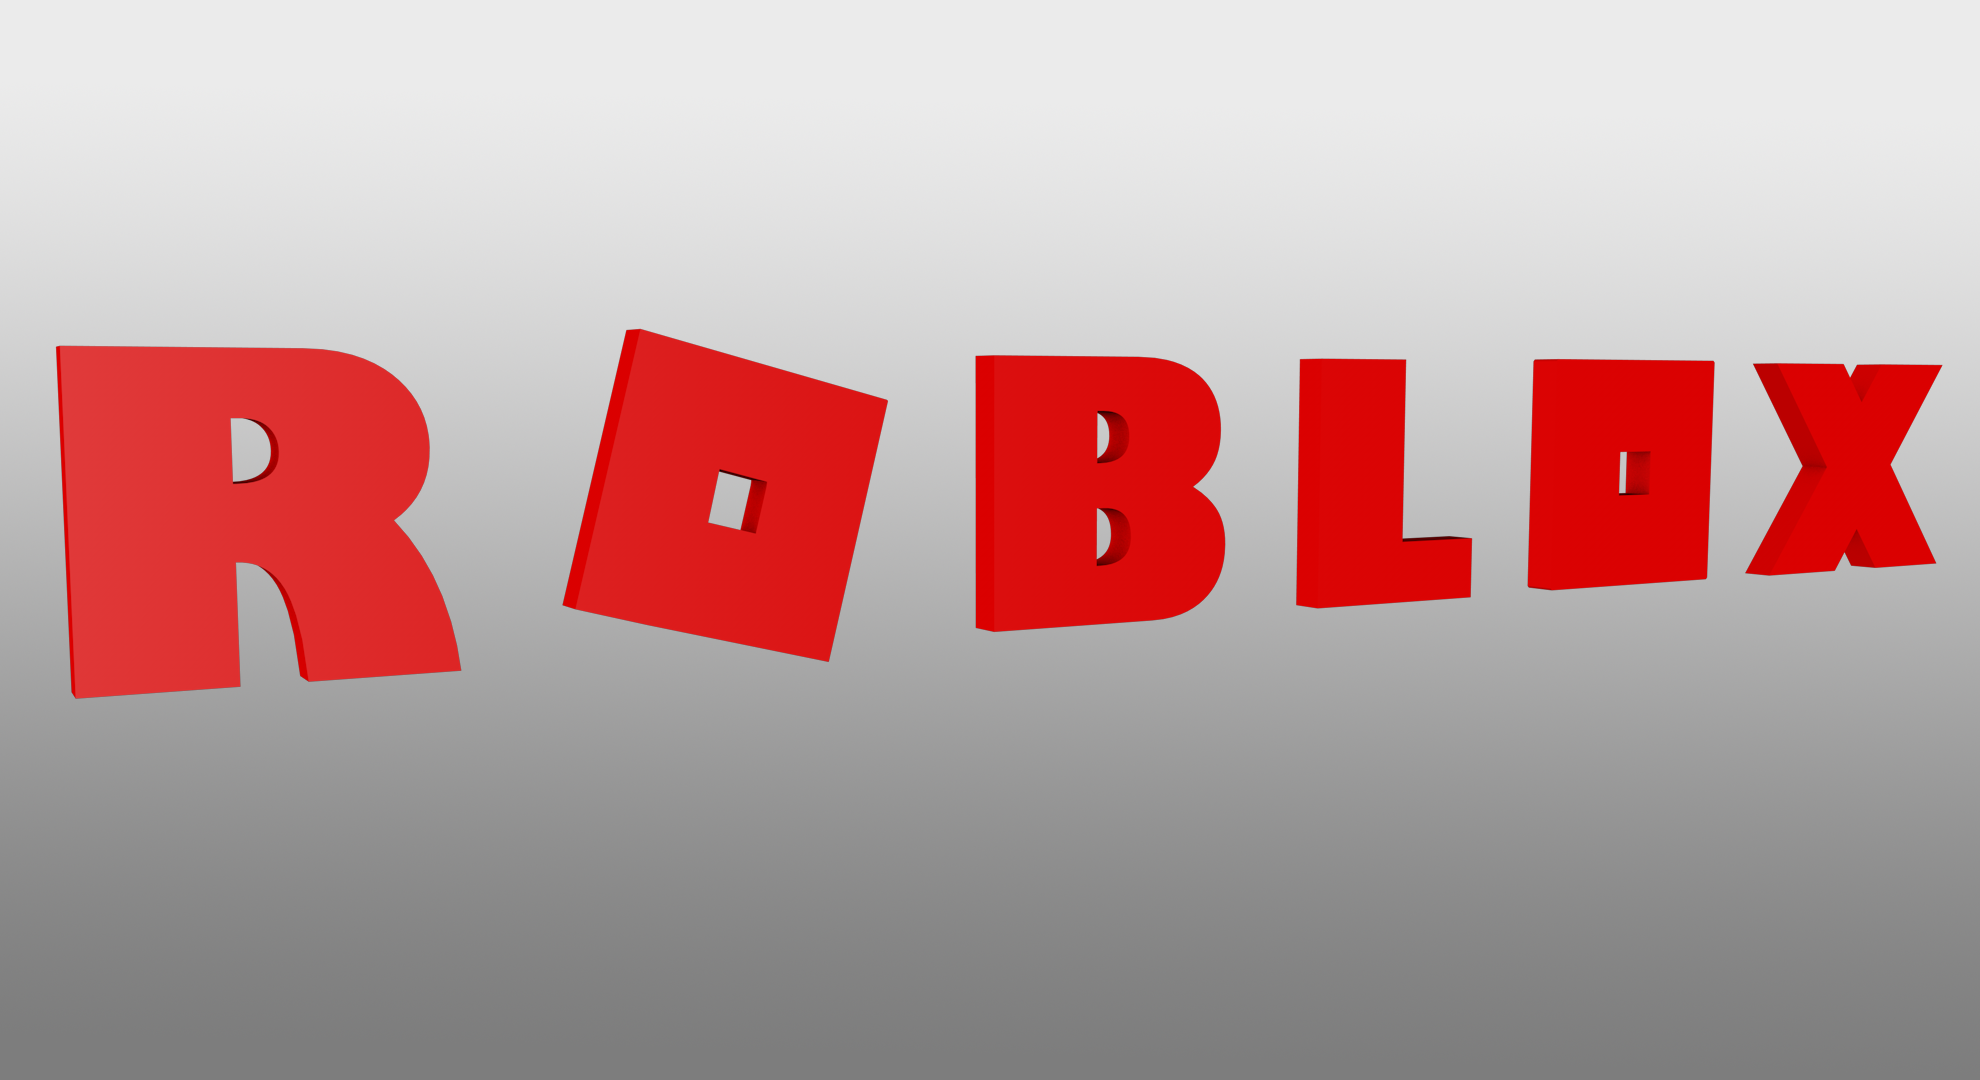 New Roblox Logo 3d Wallpaper By Auxity On Deviantart - new roblox logo 3d wallpaper by auxity